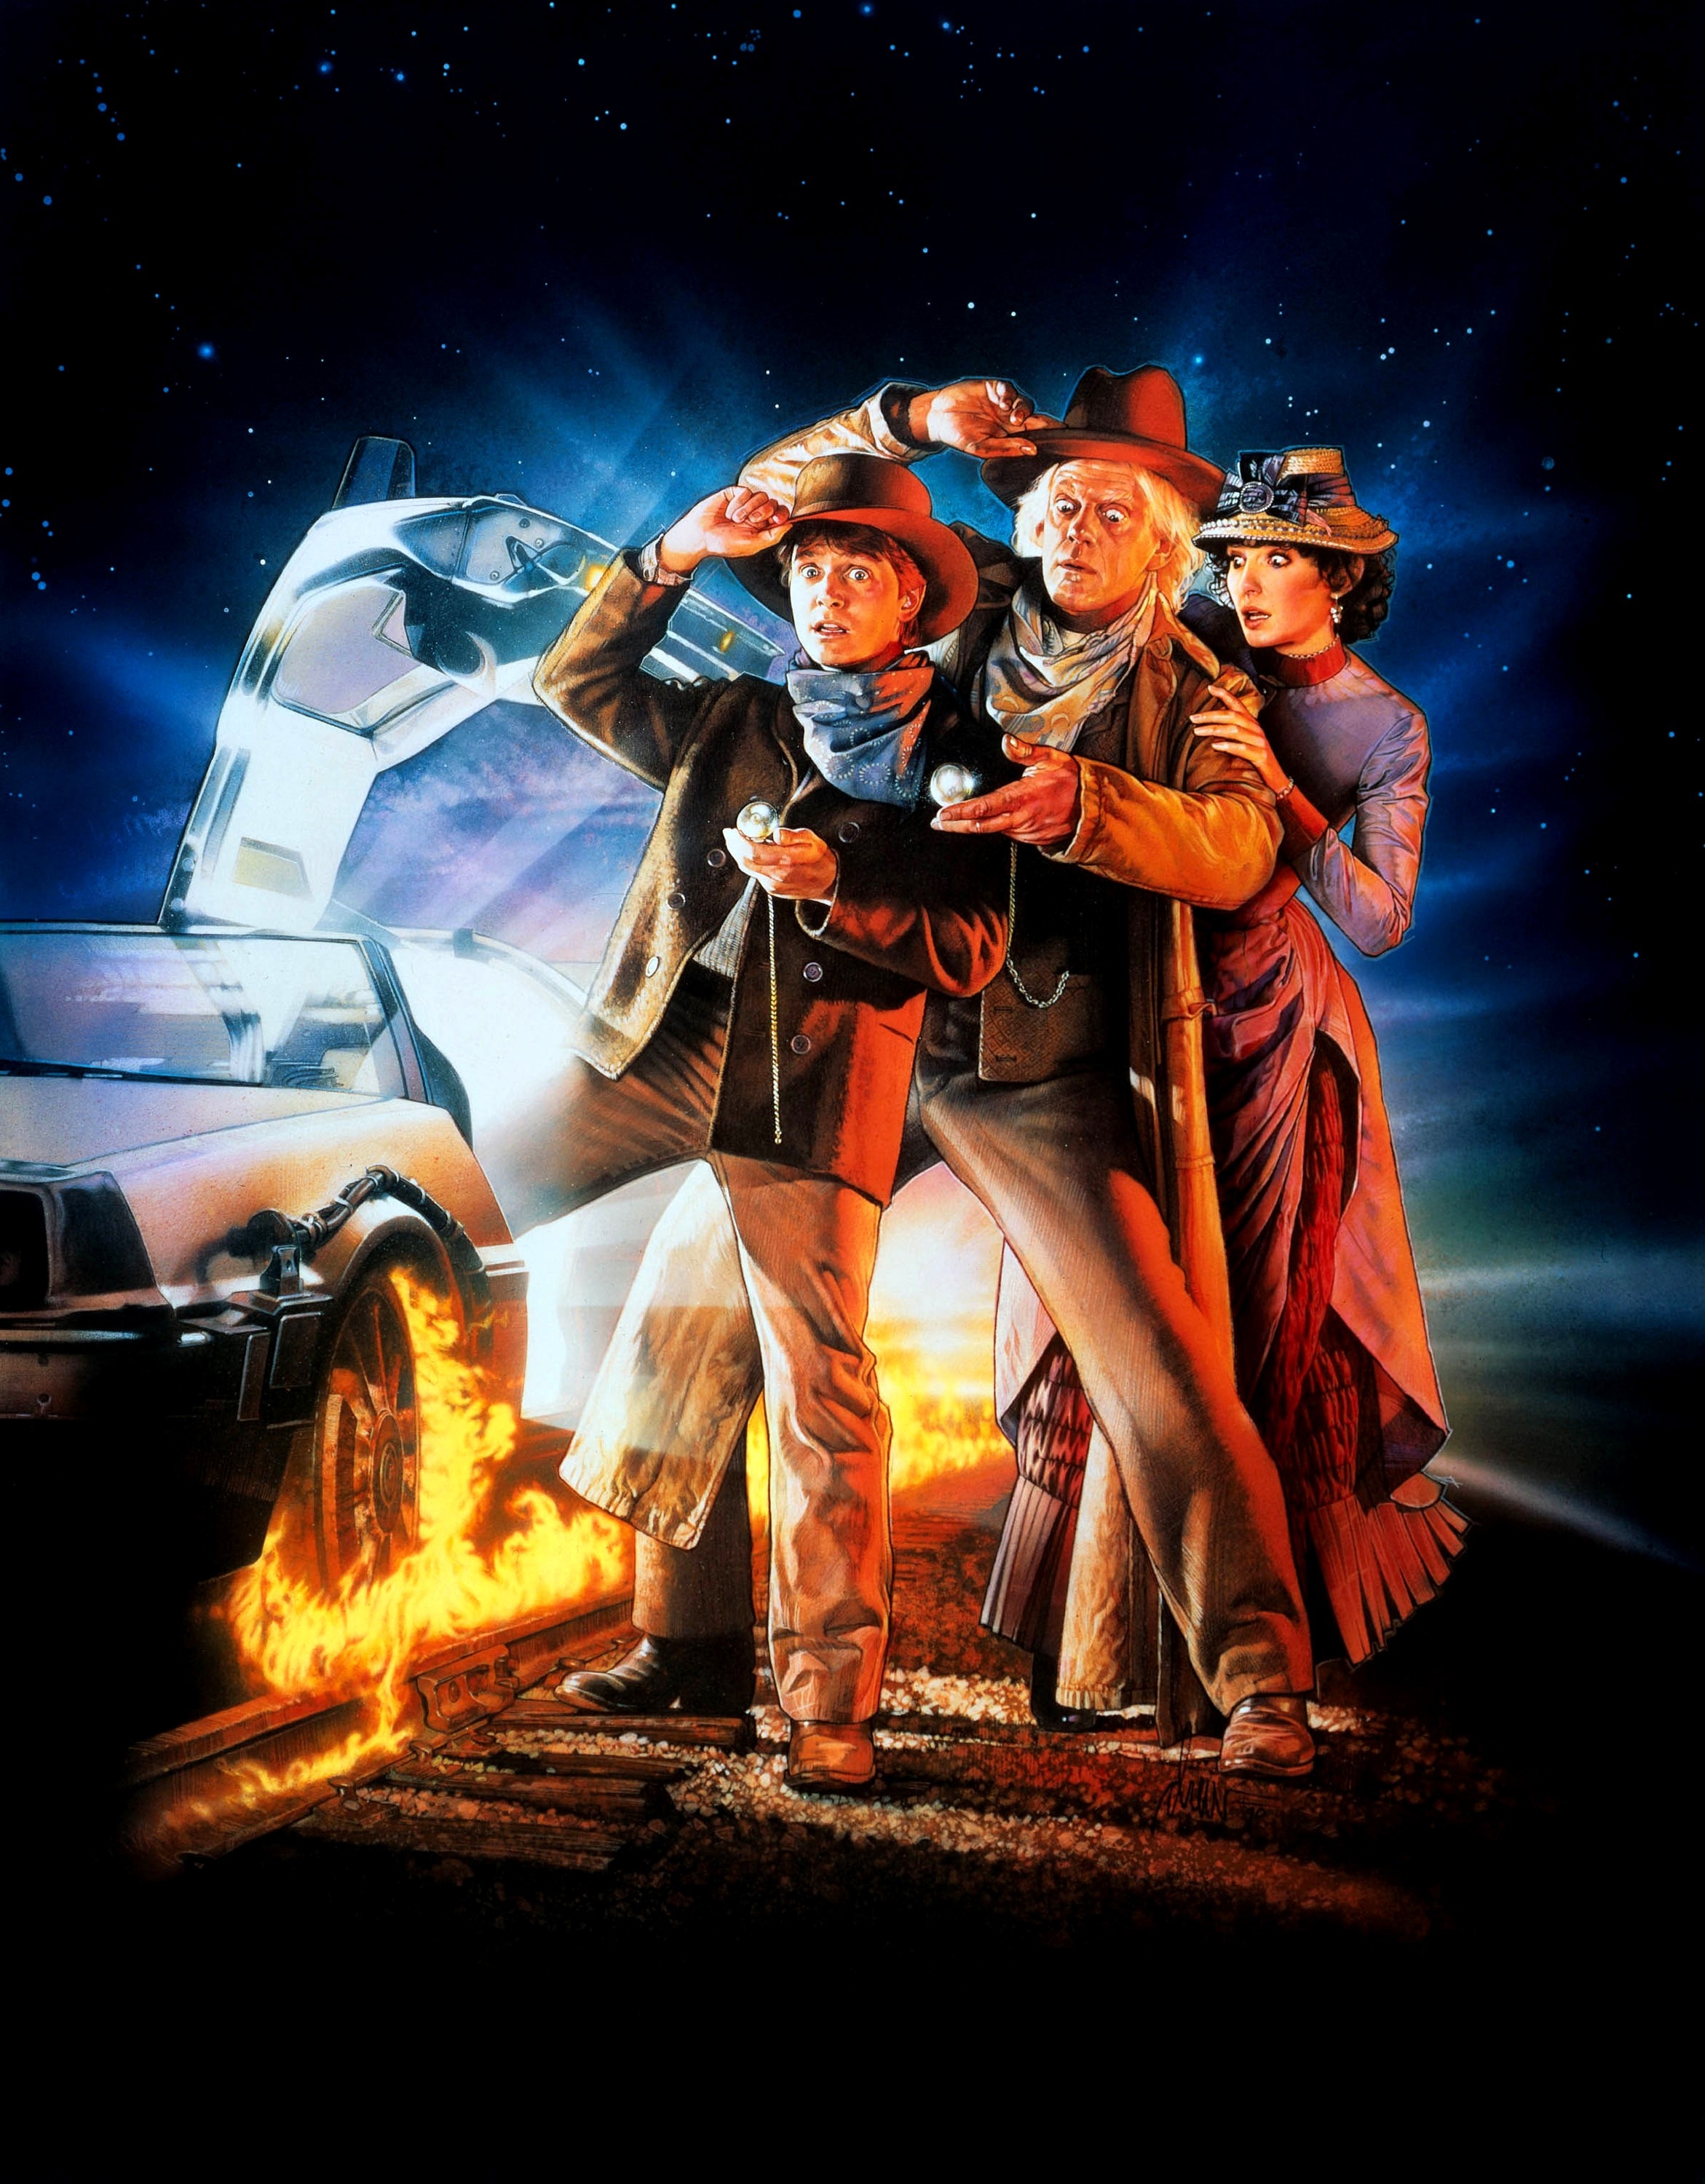 movies back to the future movie posters doc brown marty mcfly drew struzan 2342x3000 wallpaper High Quality Wallpaper, High Definition Wallpaper